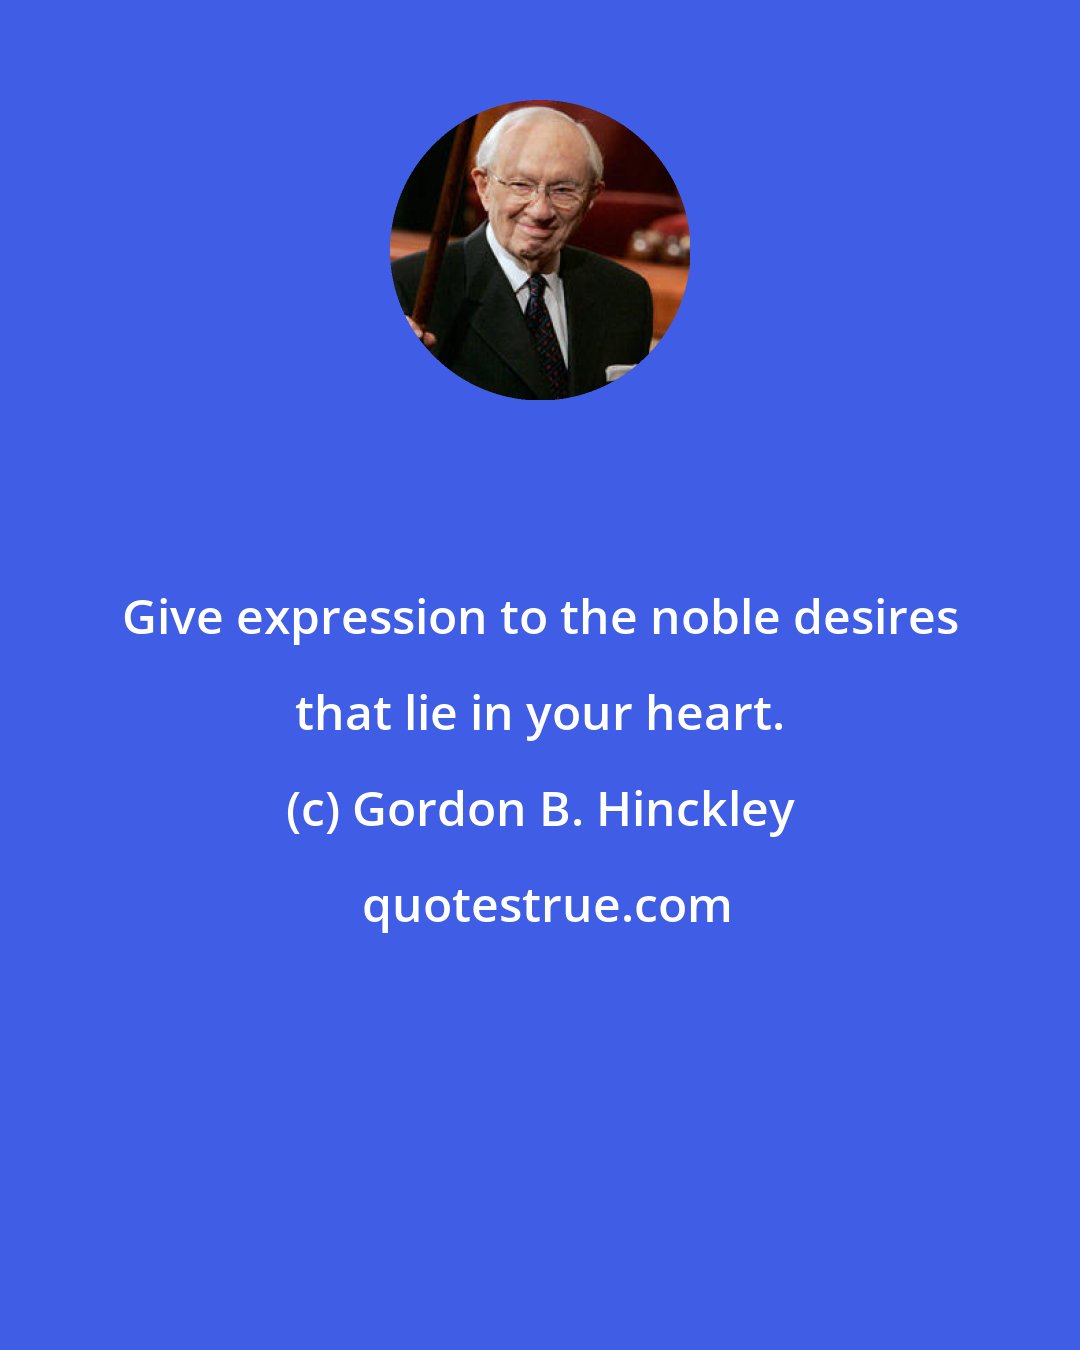 Gordon B. Hinckley: Give expression to the noble desires that lie in your heart.